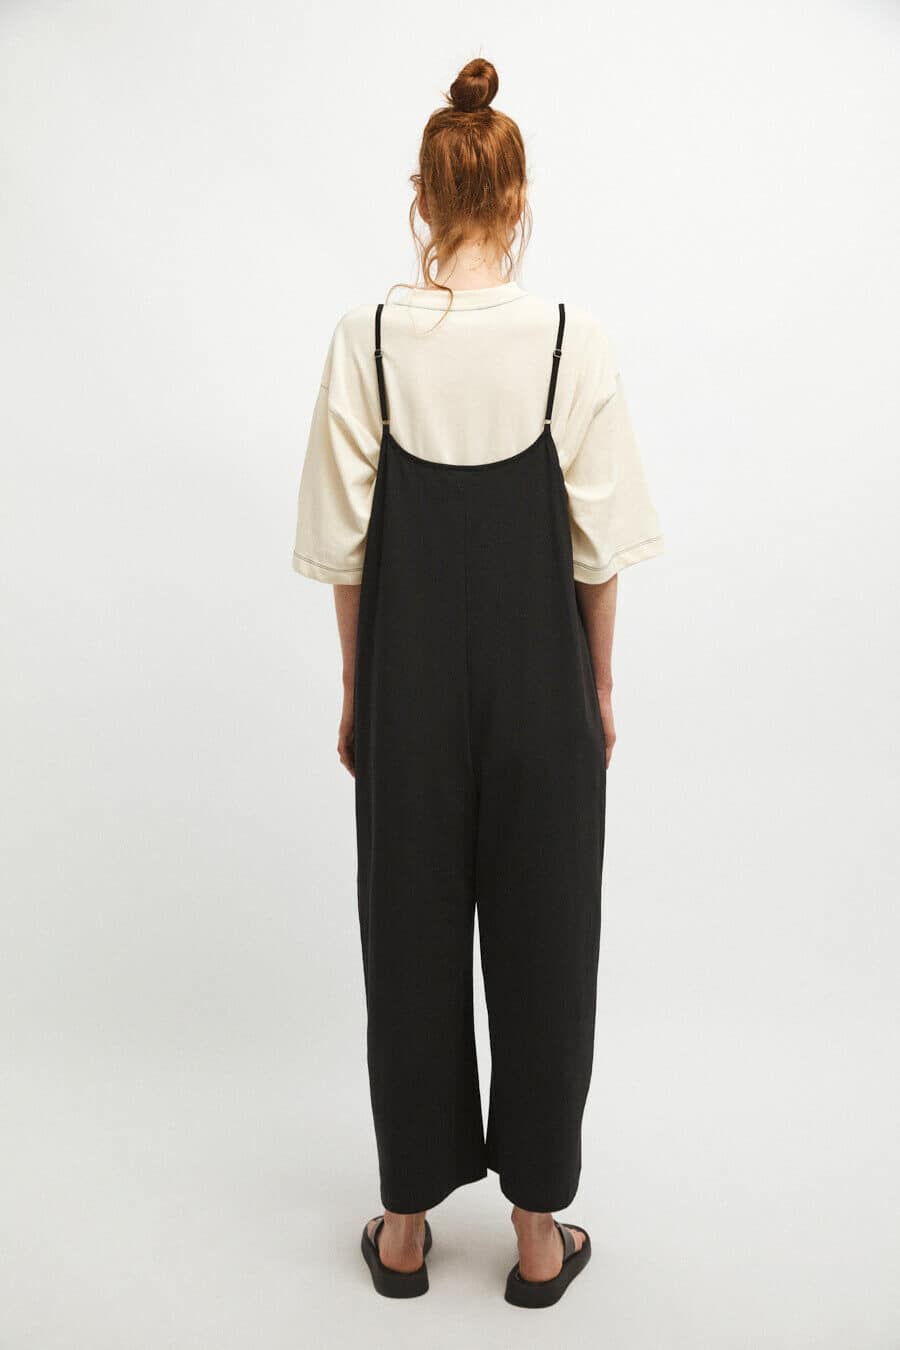 Rita Row – Luisa Jumpsuit with Front Pockets in Black